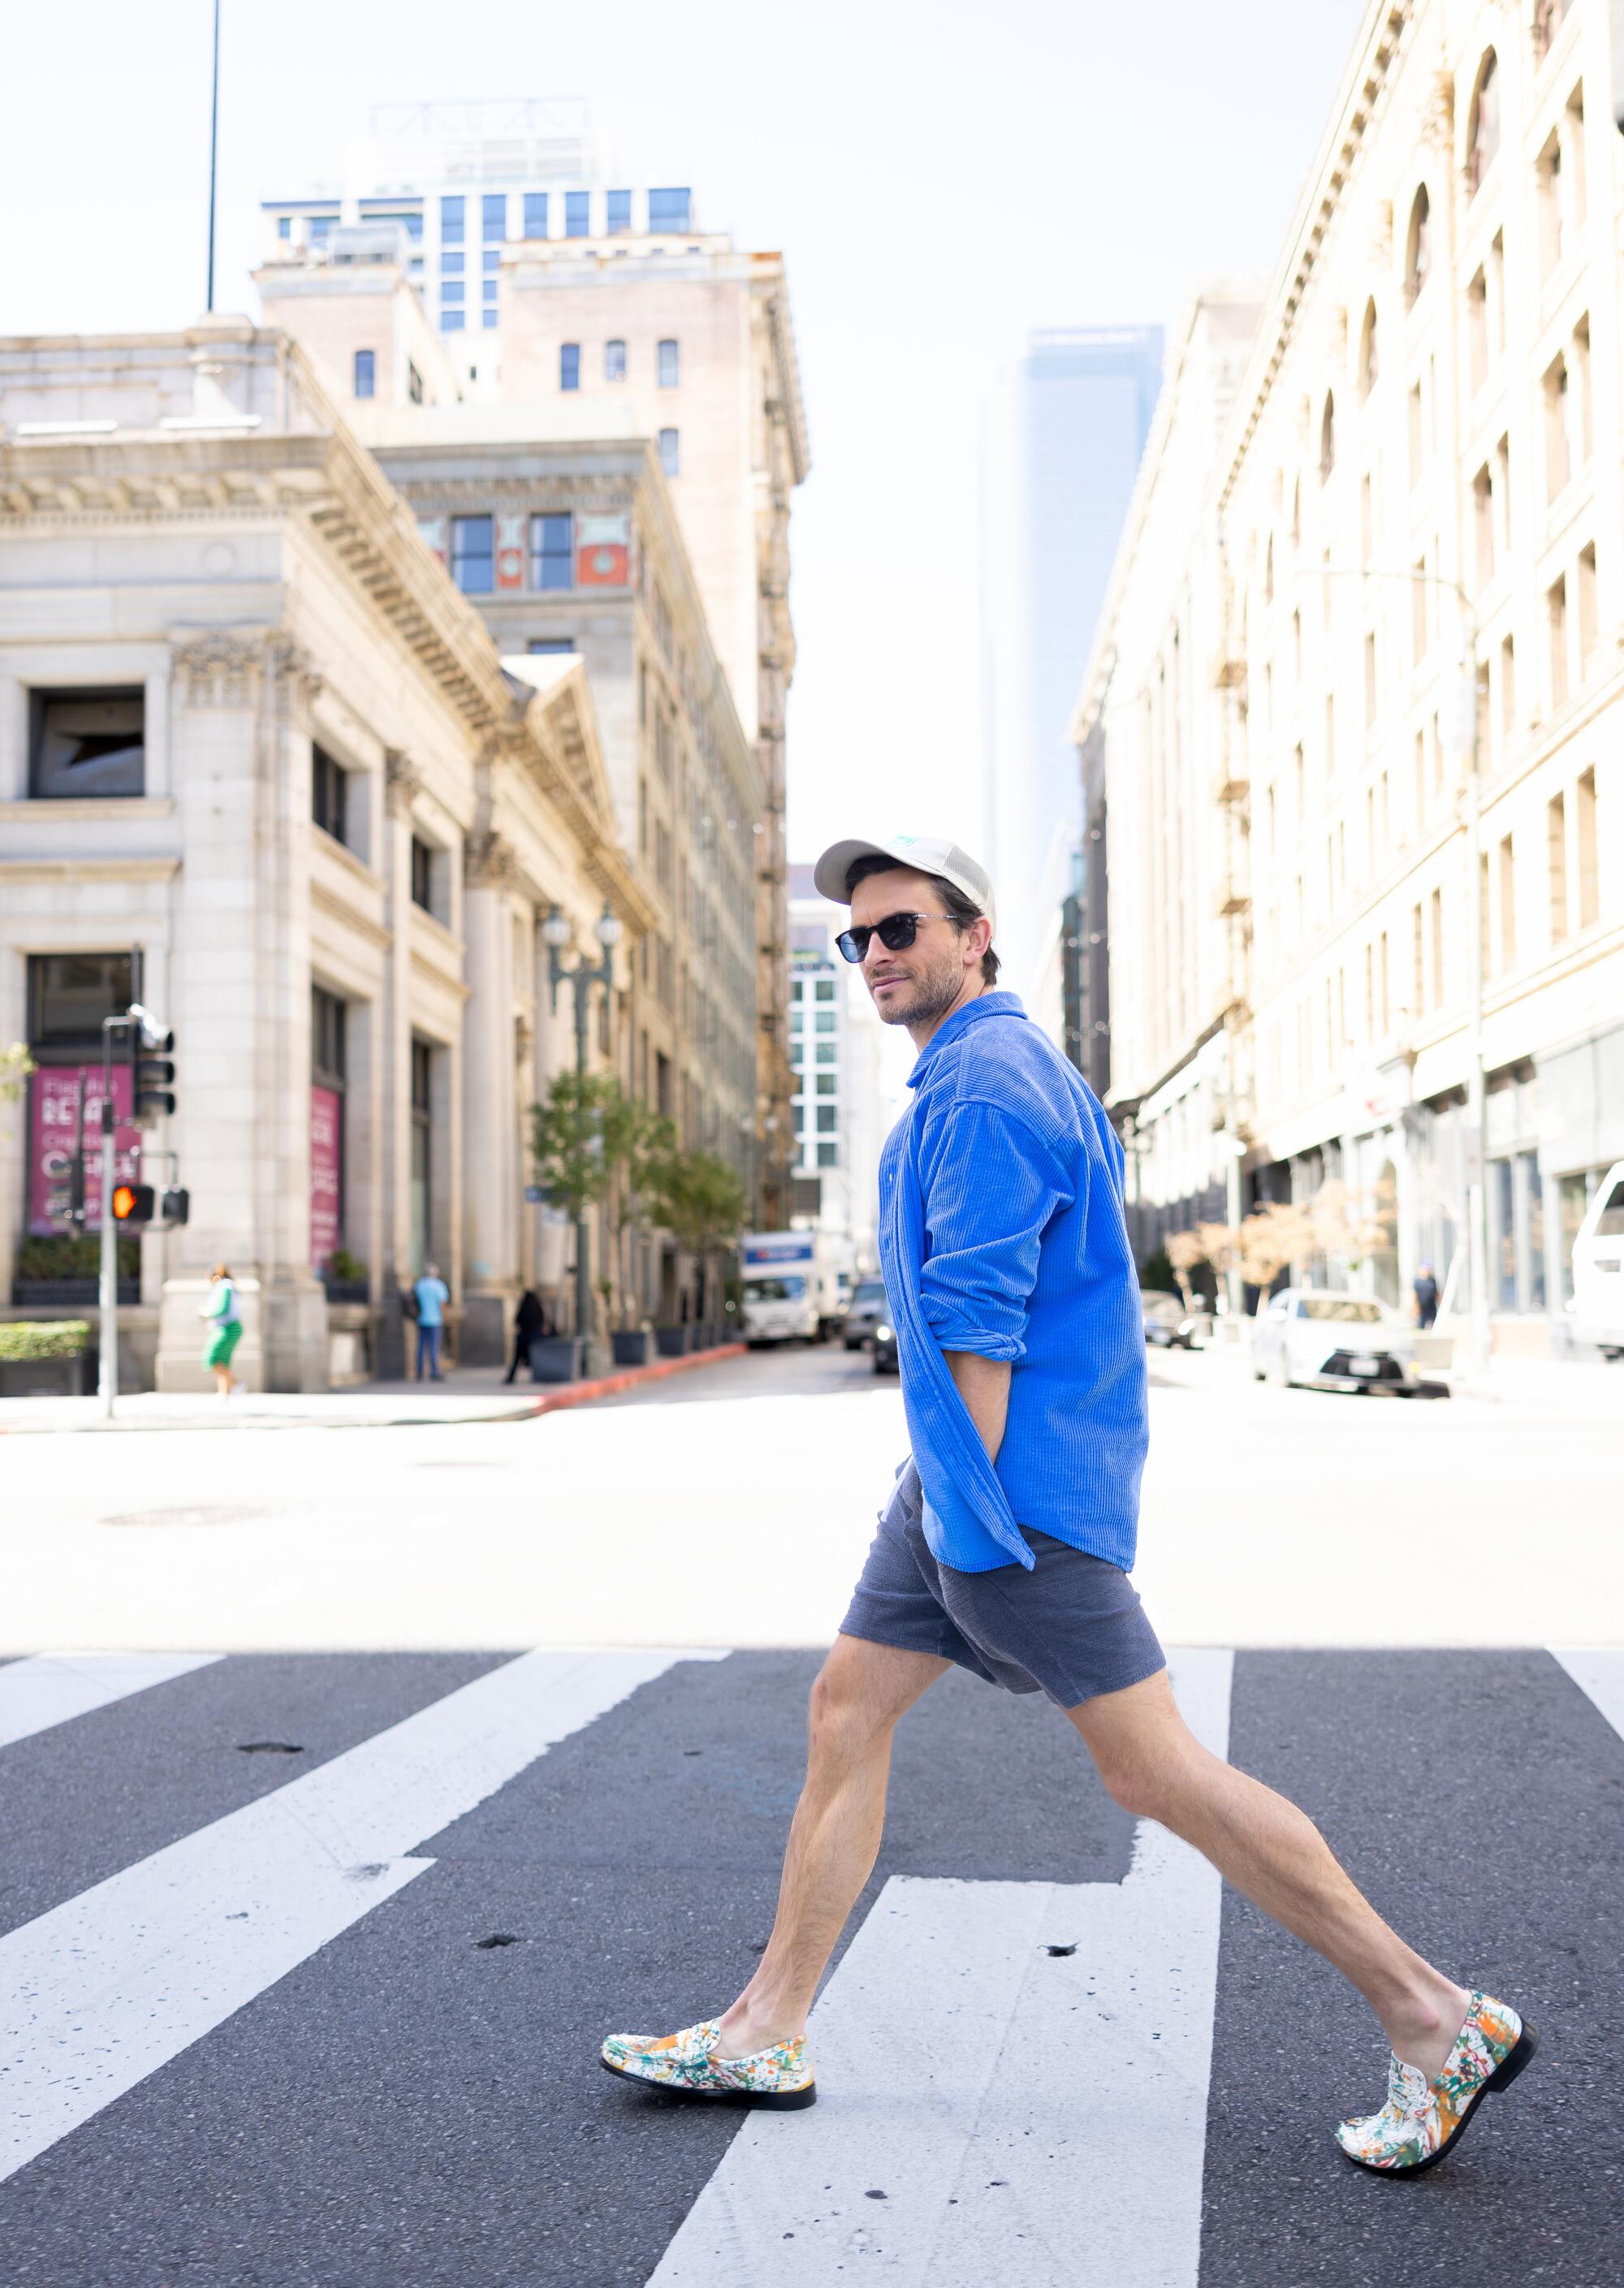 A man in a hat, a blue top and shorts crosses a street in downtown Los Angeles.